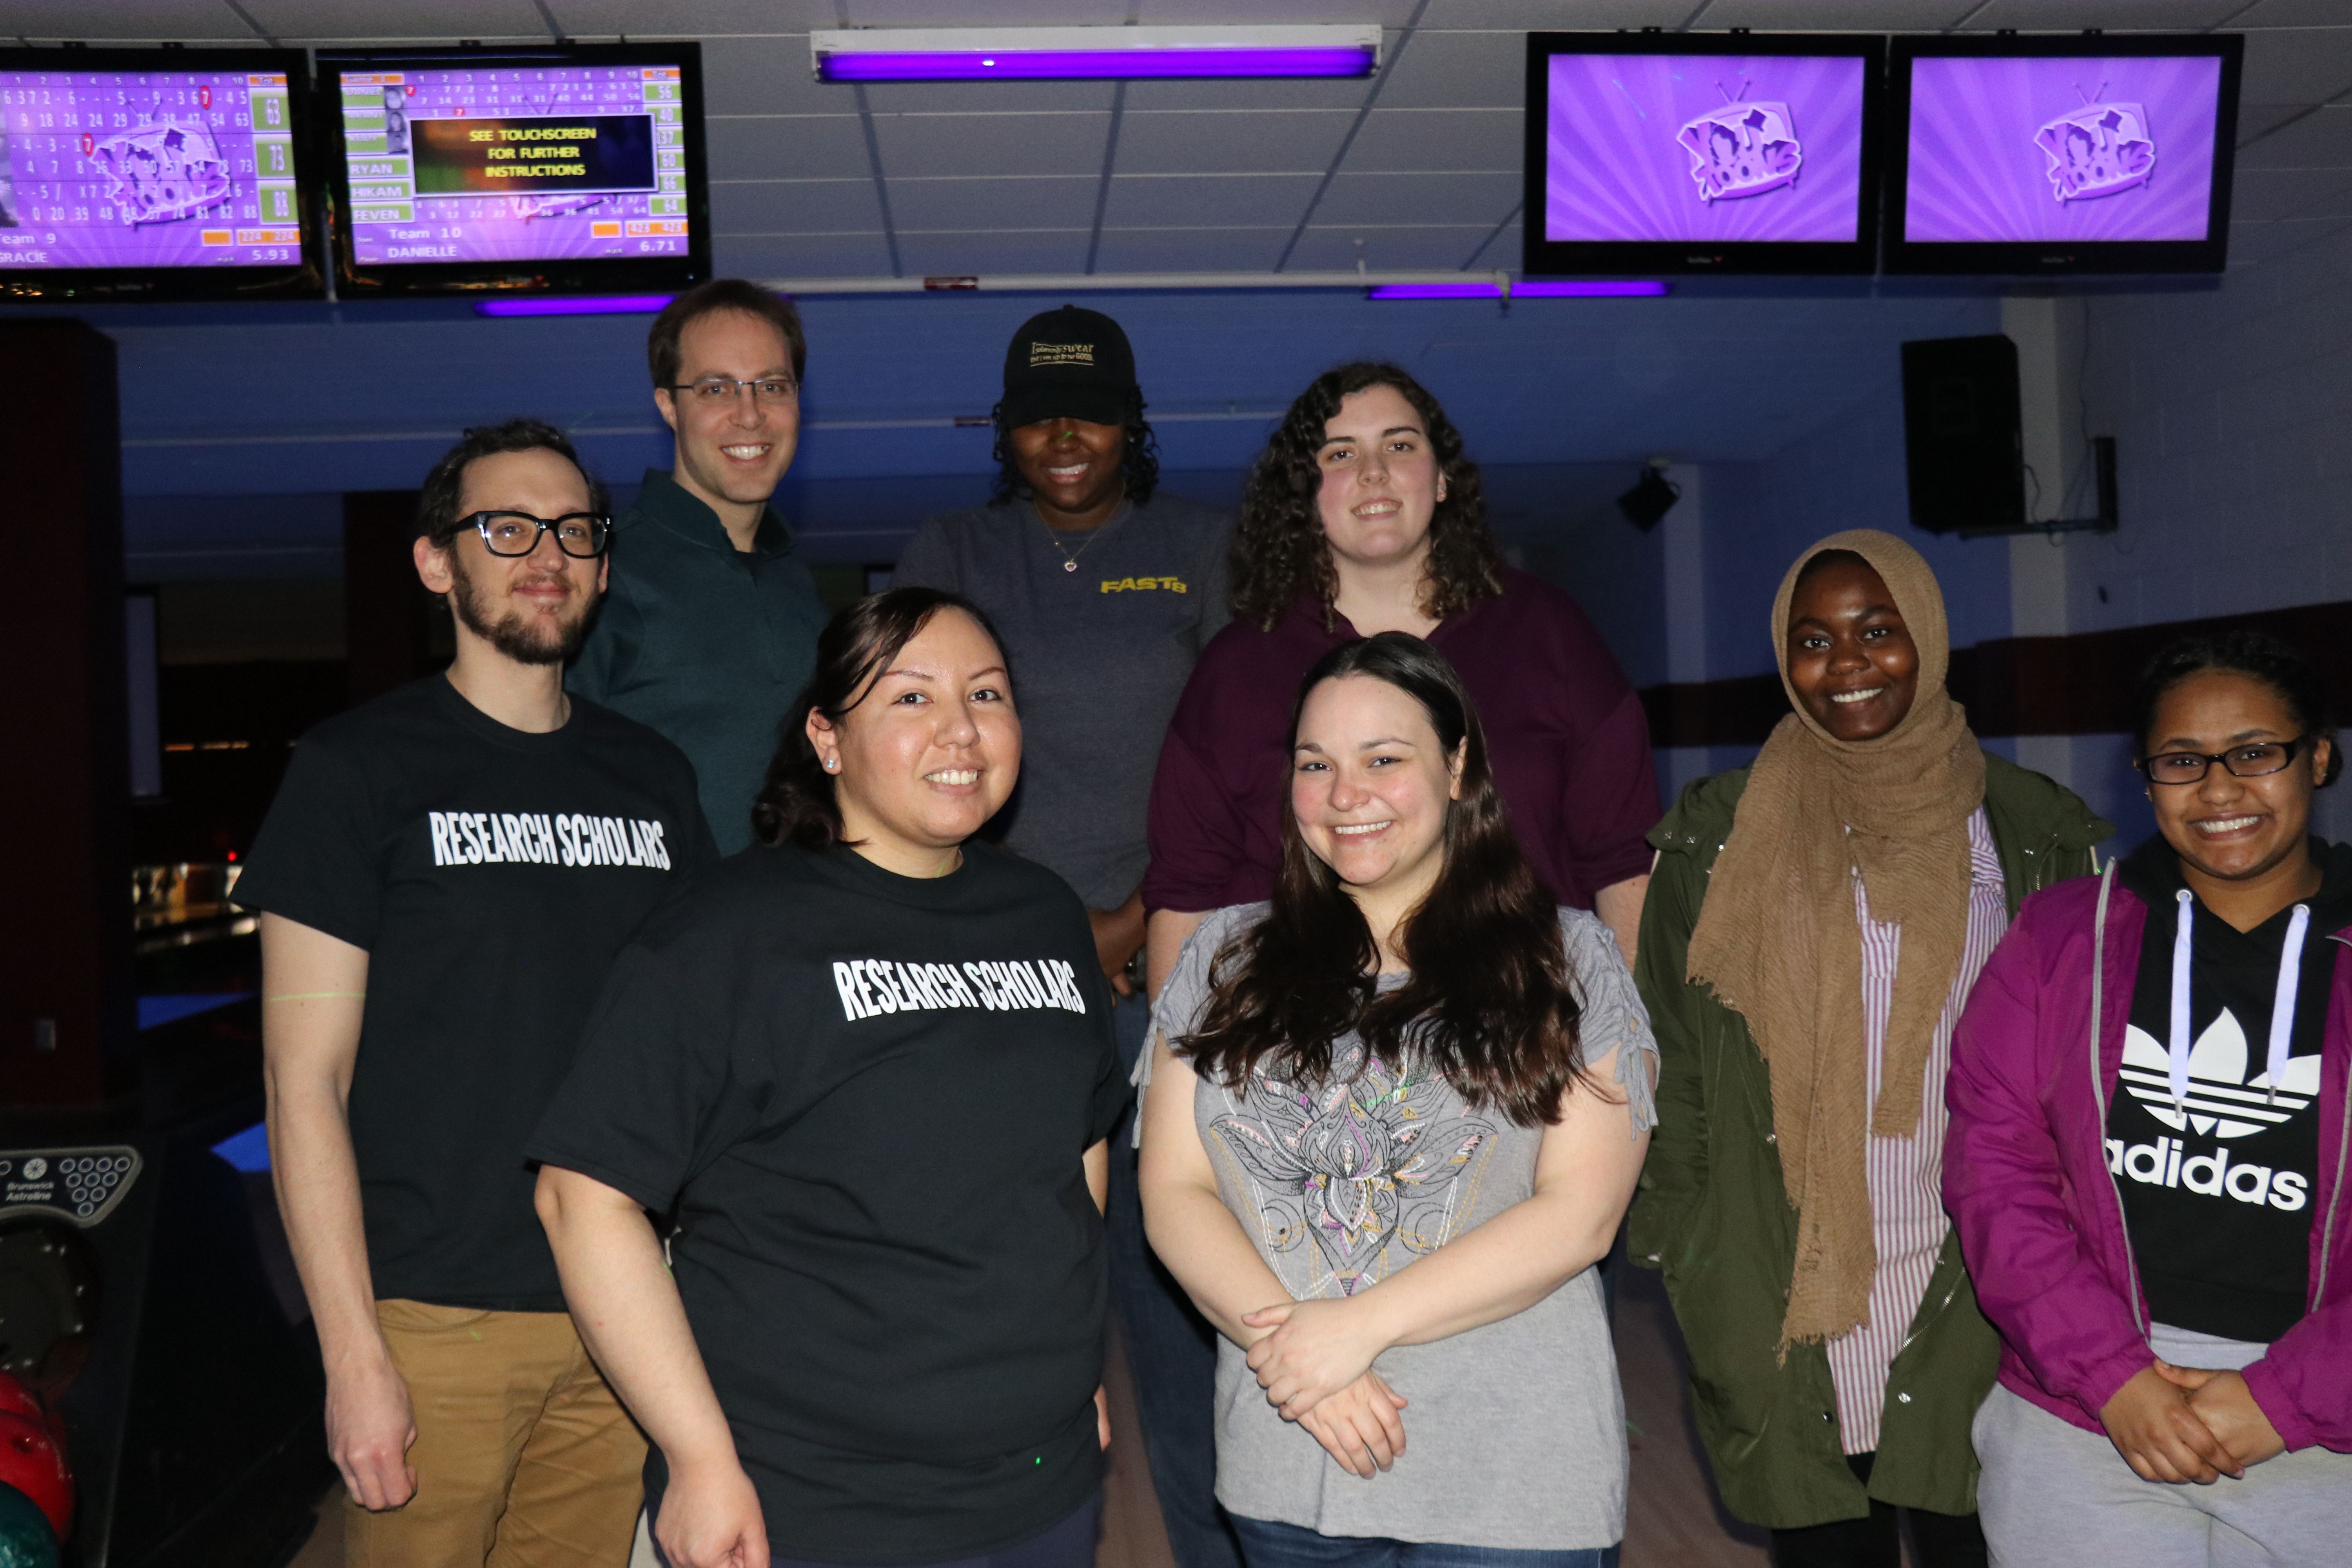 Group photo at Research Scholars bowling event.